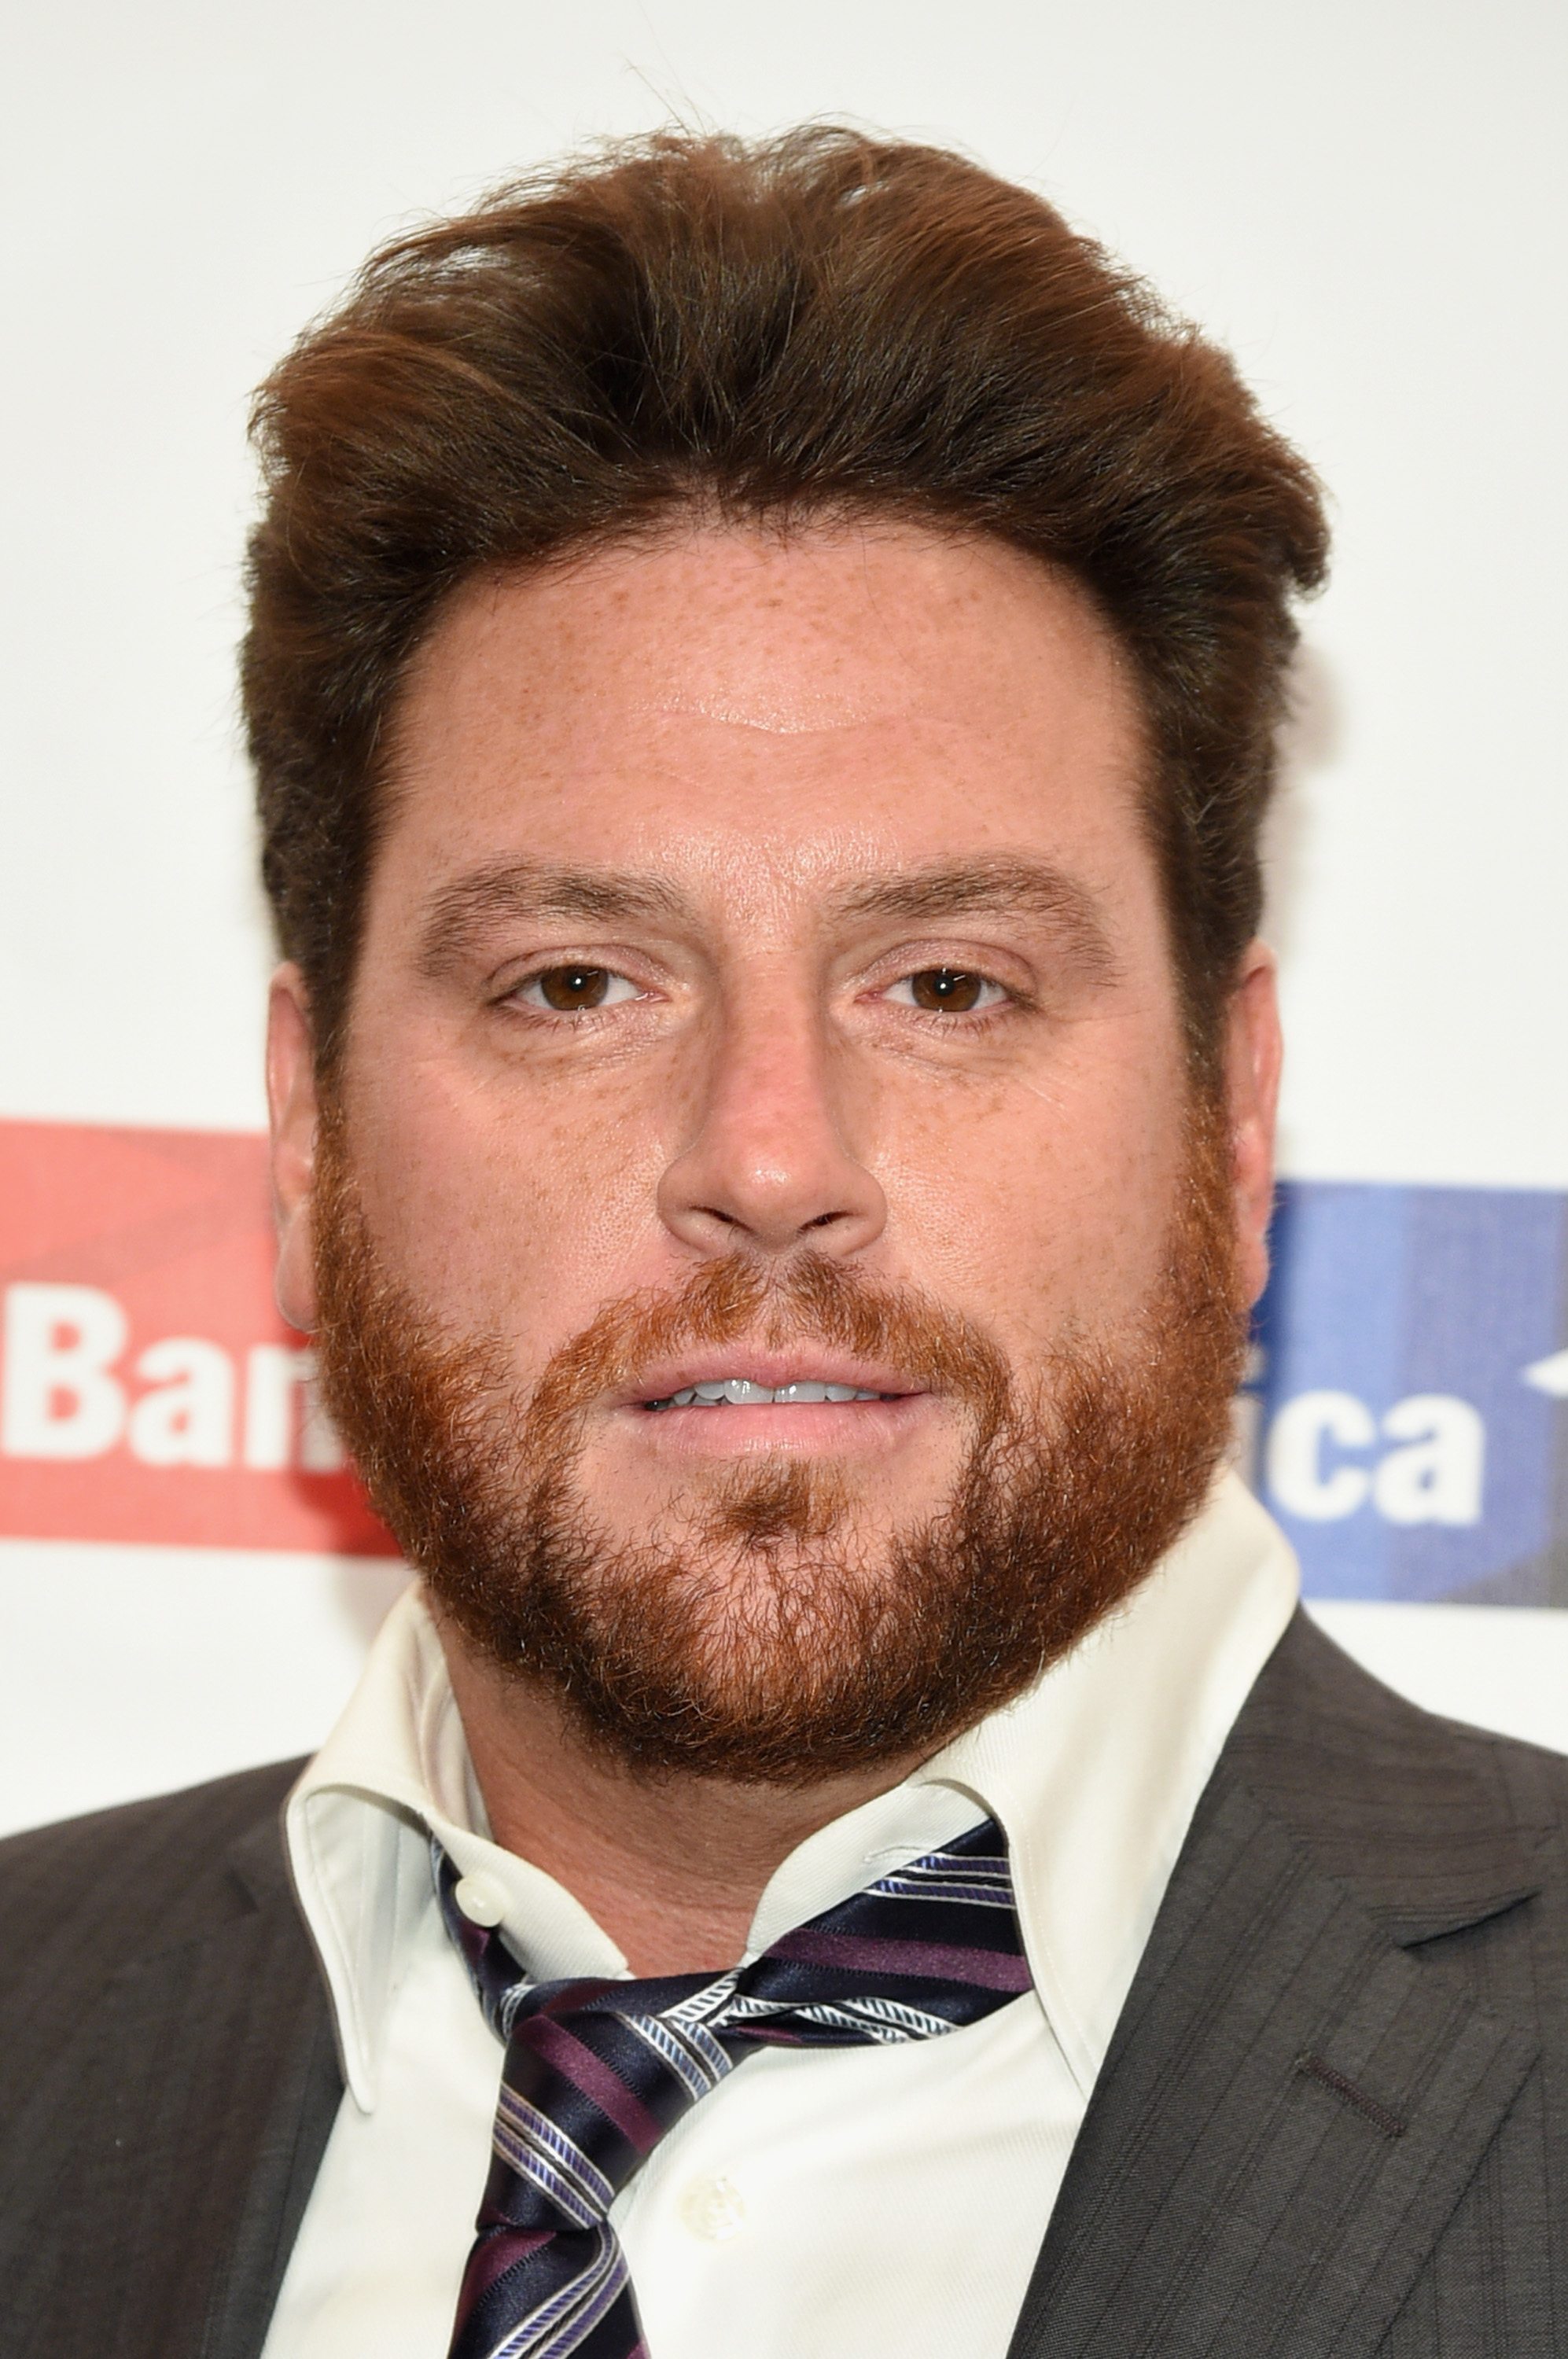 Chef Scott Conant attends the Food Bank For New York City gala on April 21, 2015 in New York City. (Bryan Bedder—2015 Getty Images)